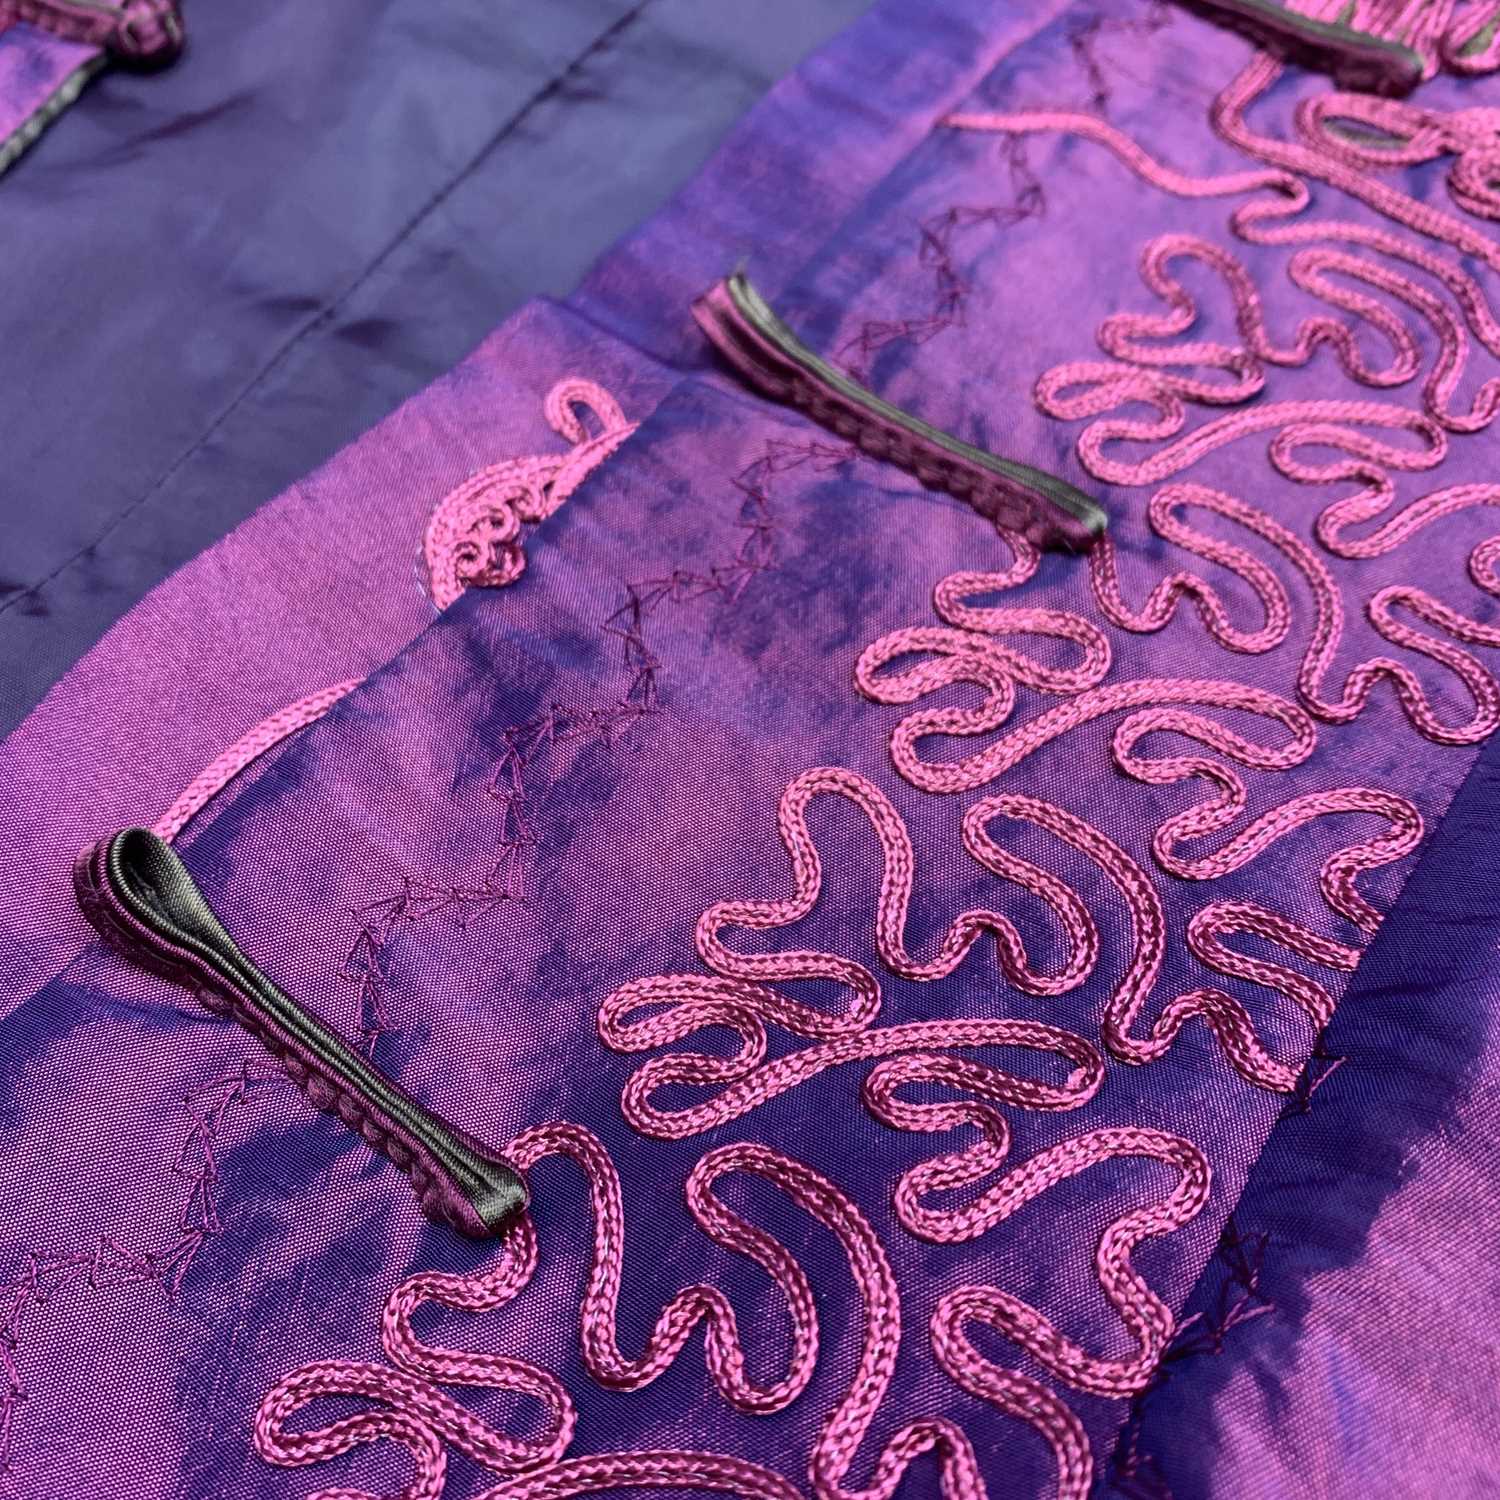 A Chinese lady's jacket, 20th century, in shimmering purple with decorative raised embroidery, - Image 3 of 3